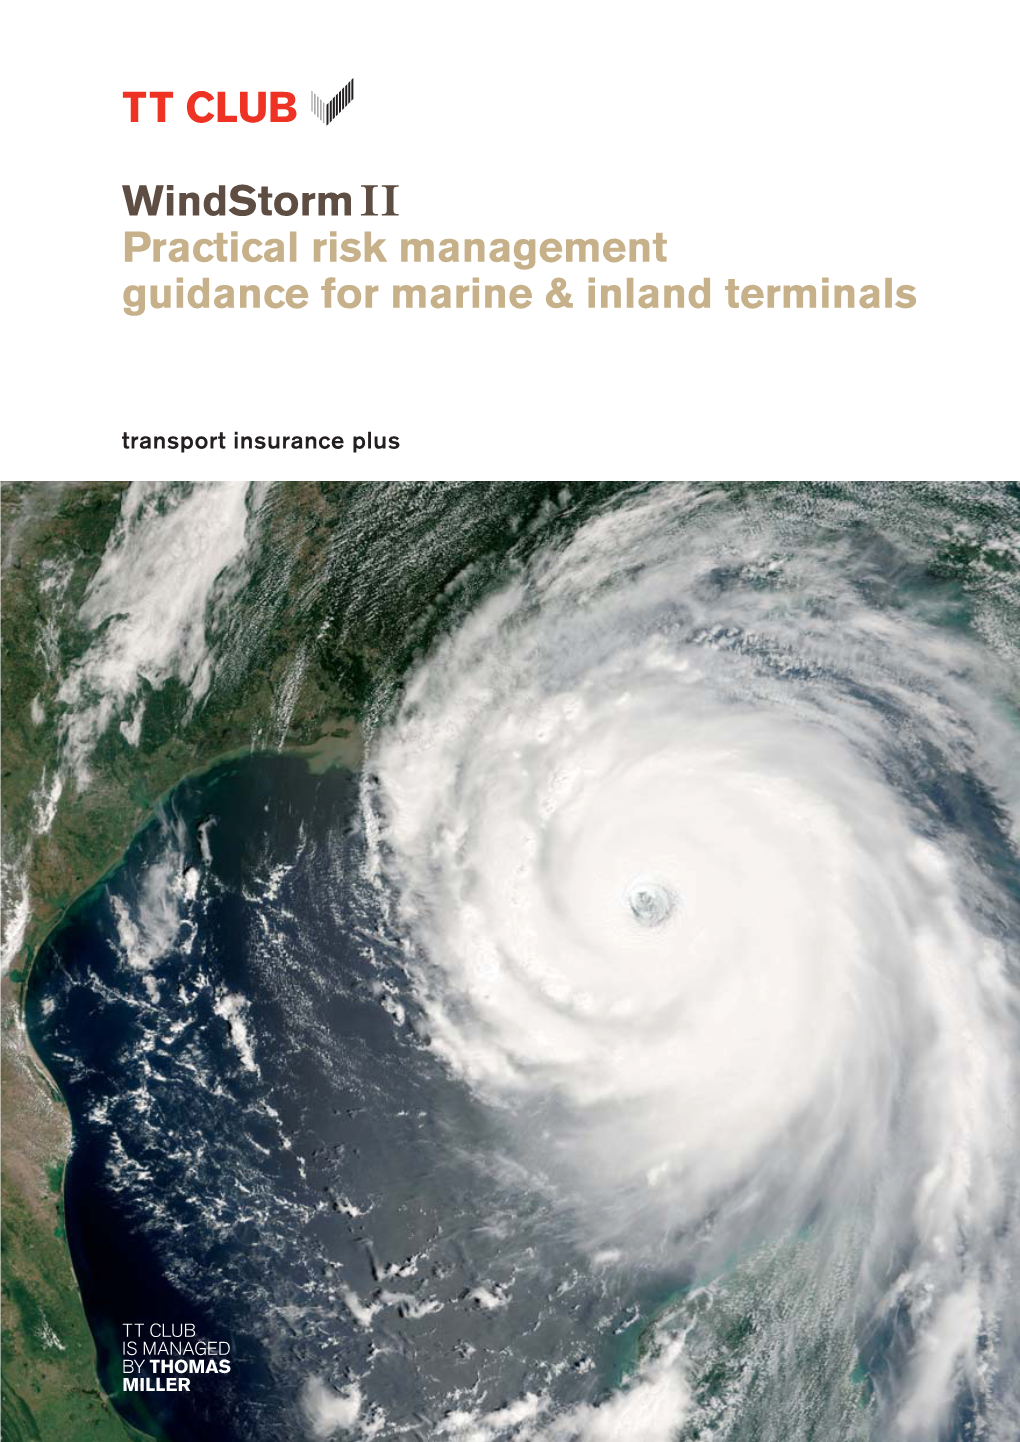 Windstormii Practical Risk Management Guidance for Marine & Inland Terminals